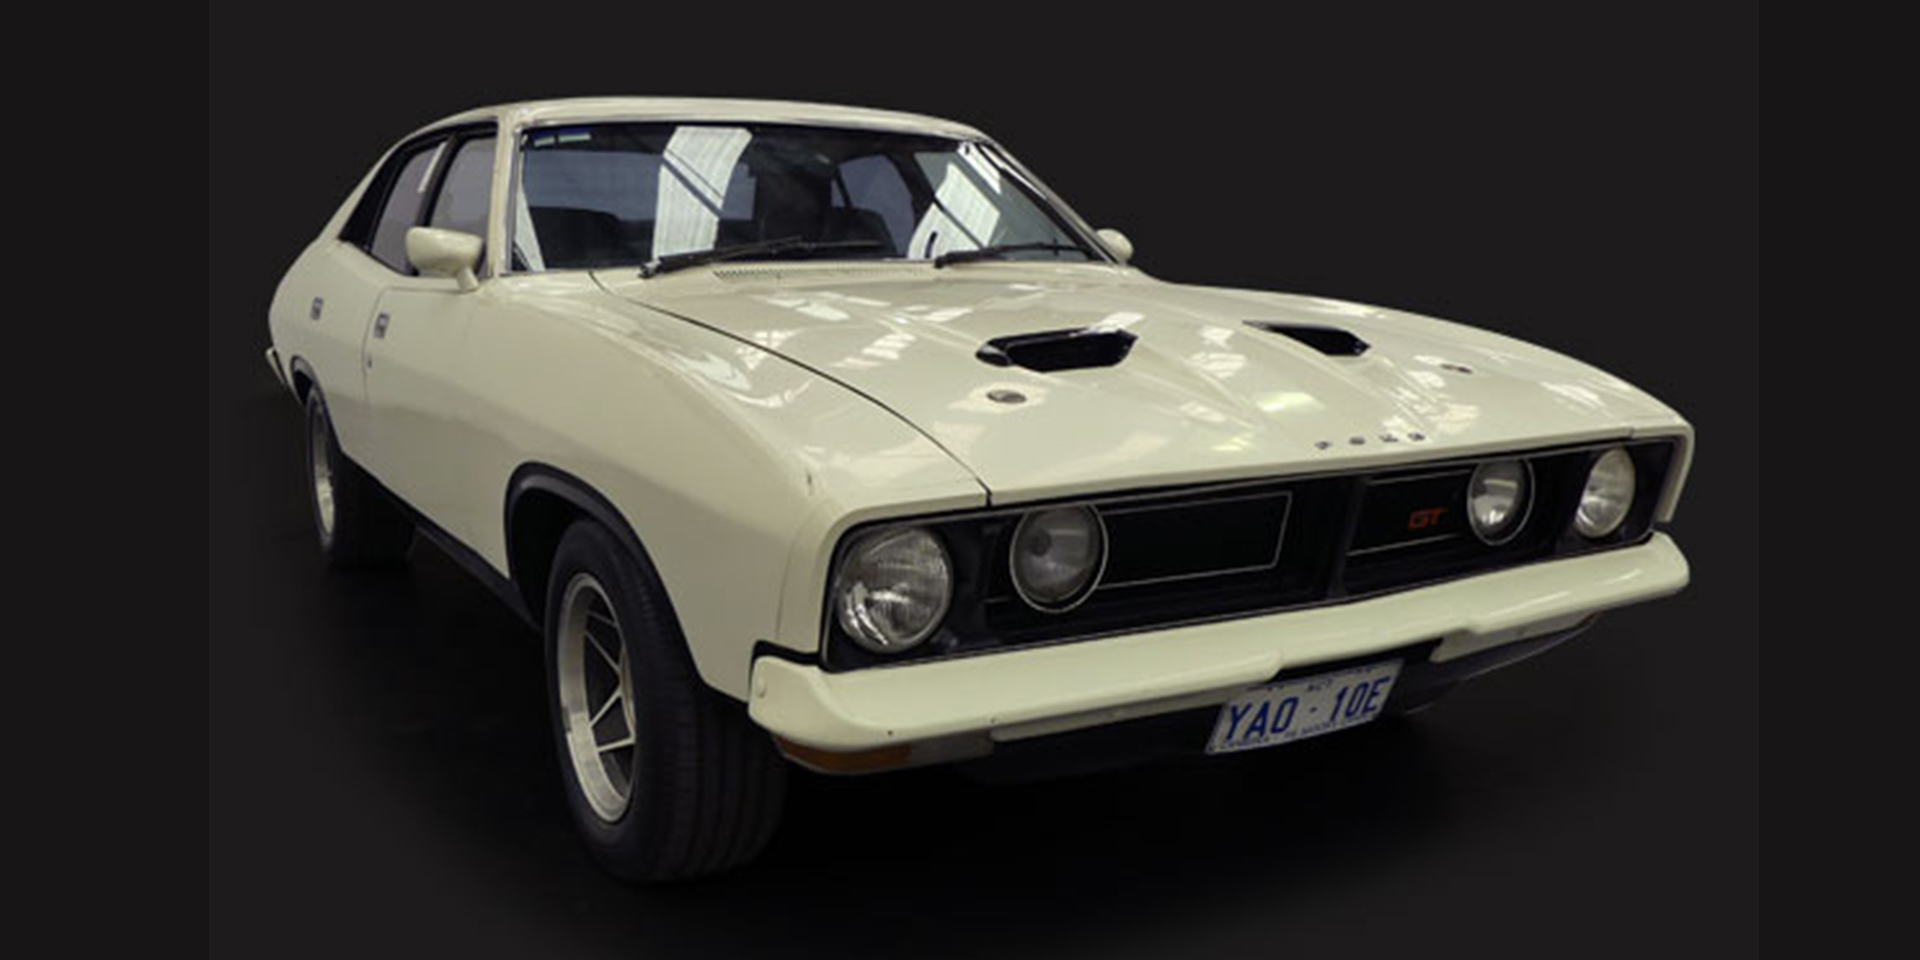 A rare 1975 Ford Falcon XB GT is up for auction